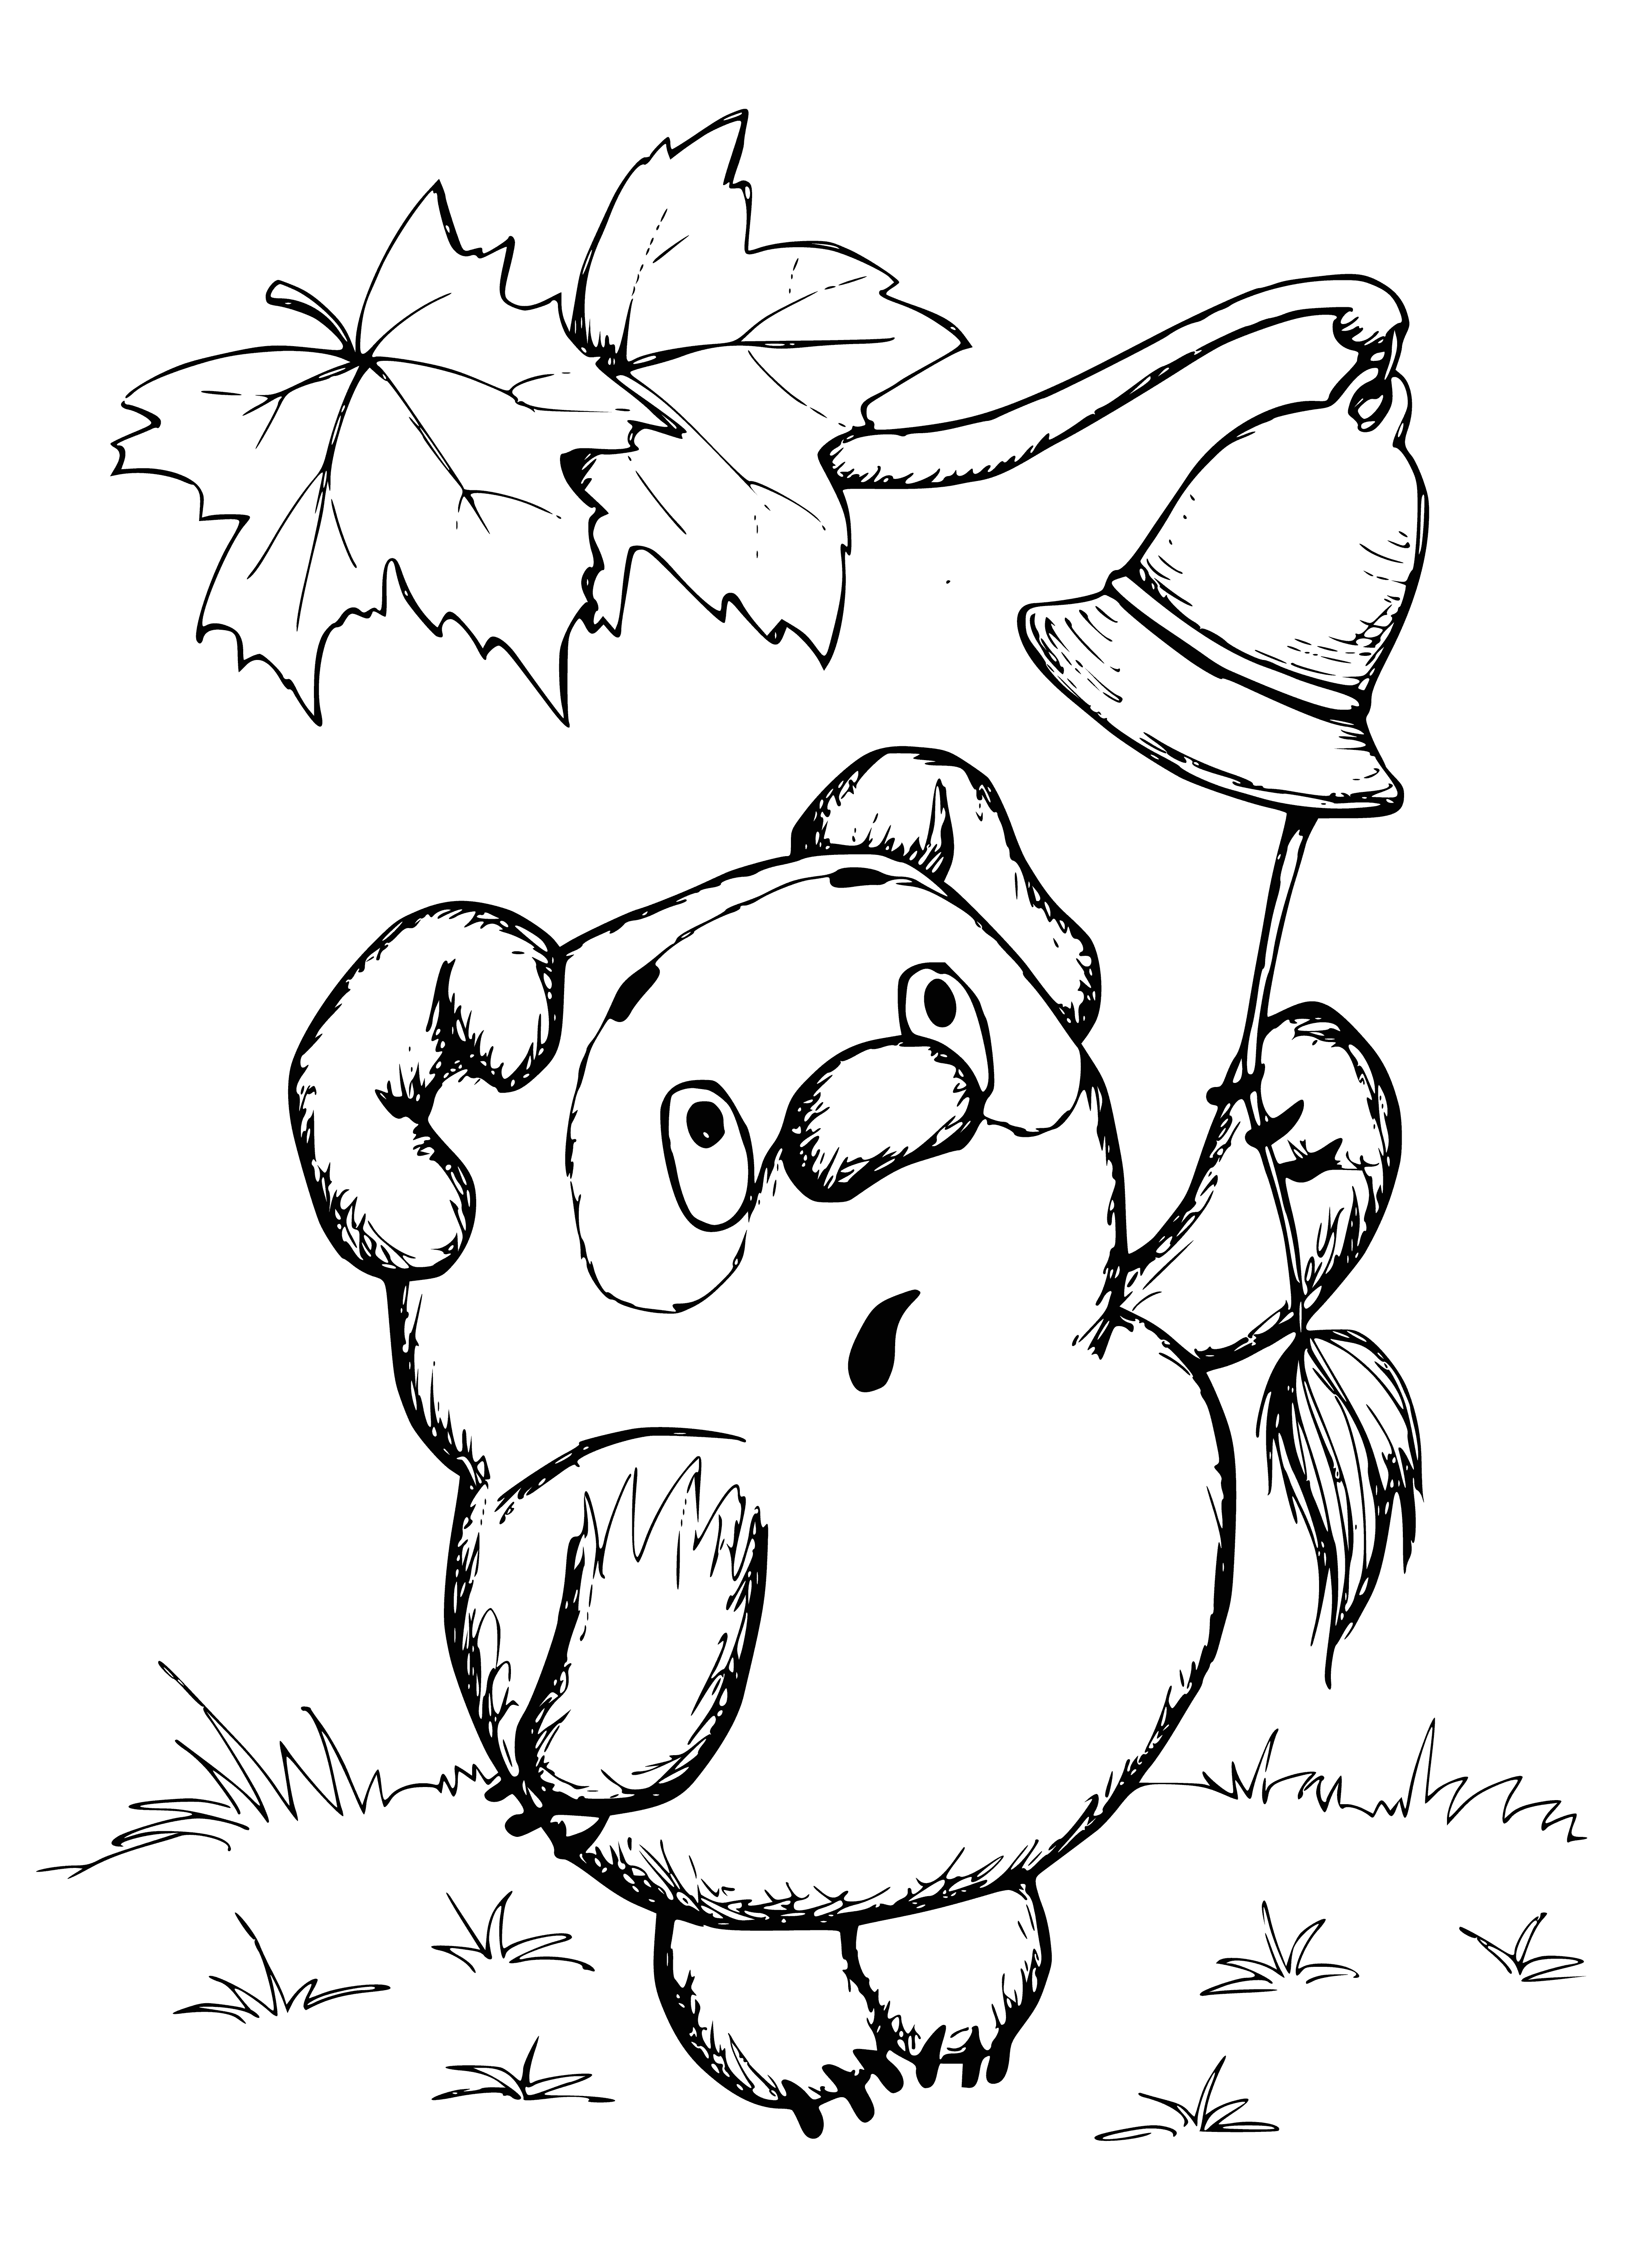 coloring page: Bear stands on hind legs, holding one end of rope in mouth which is tied to a lace; pulling it tight.